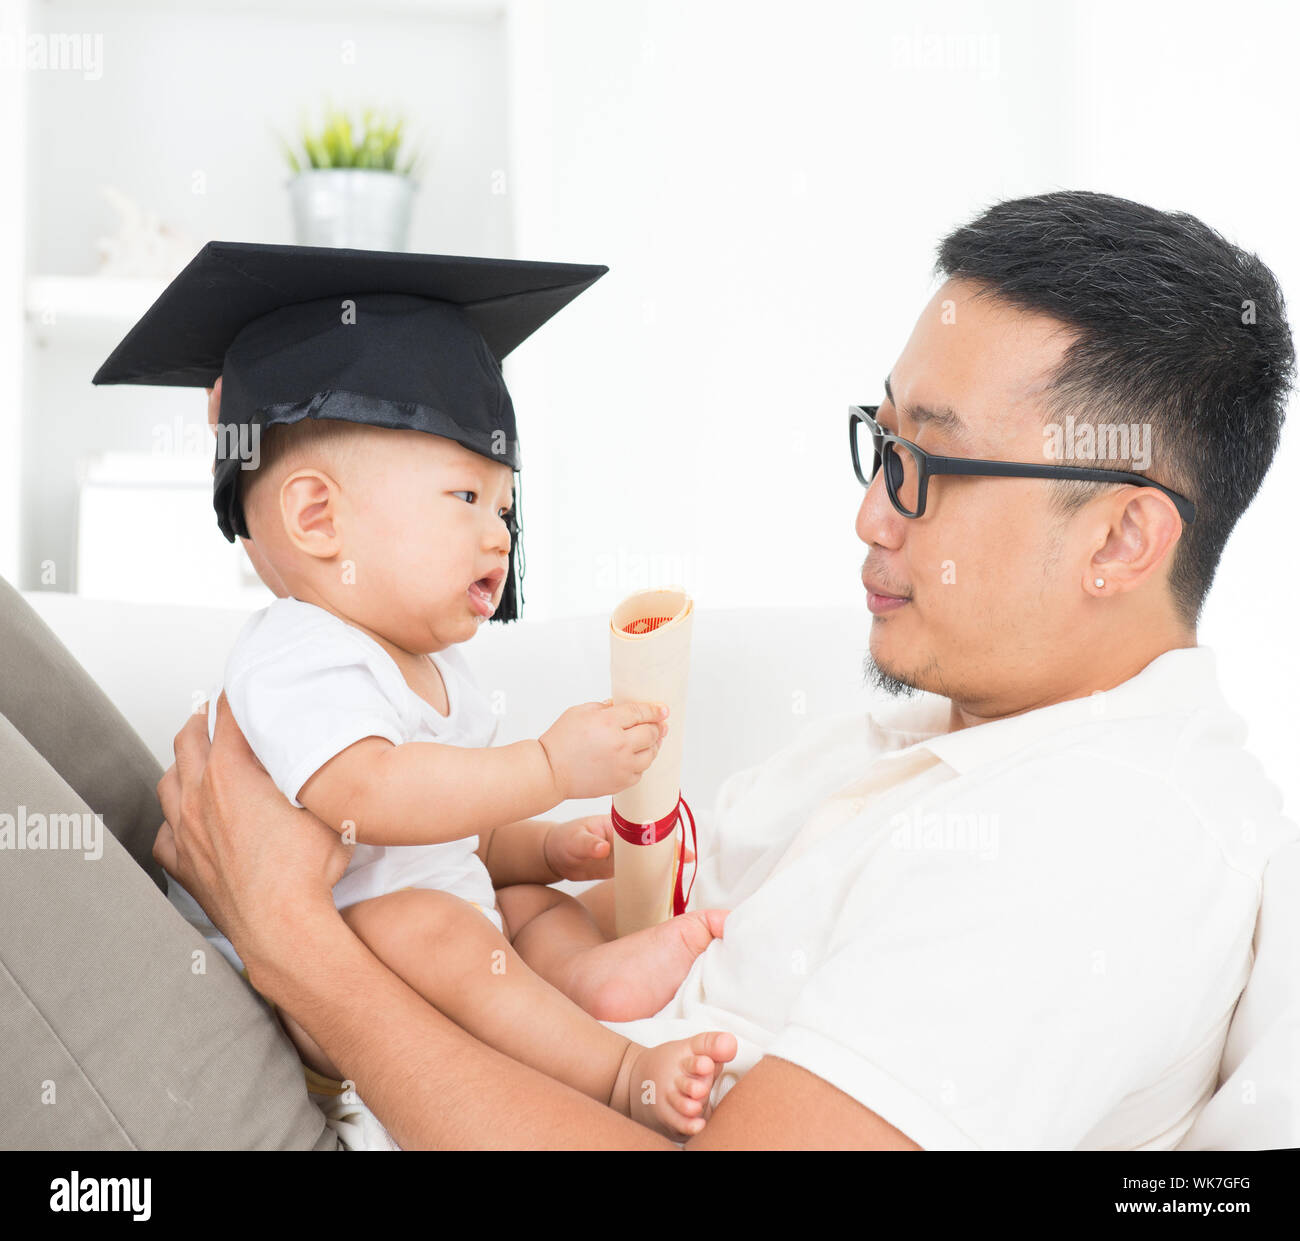 Asian family lifestyle at home. Baby with graduation cap holding certificate. Child and father early education concept. Stock Photo